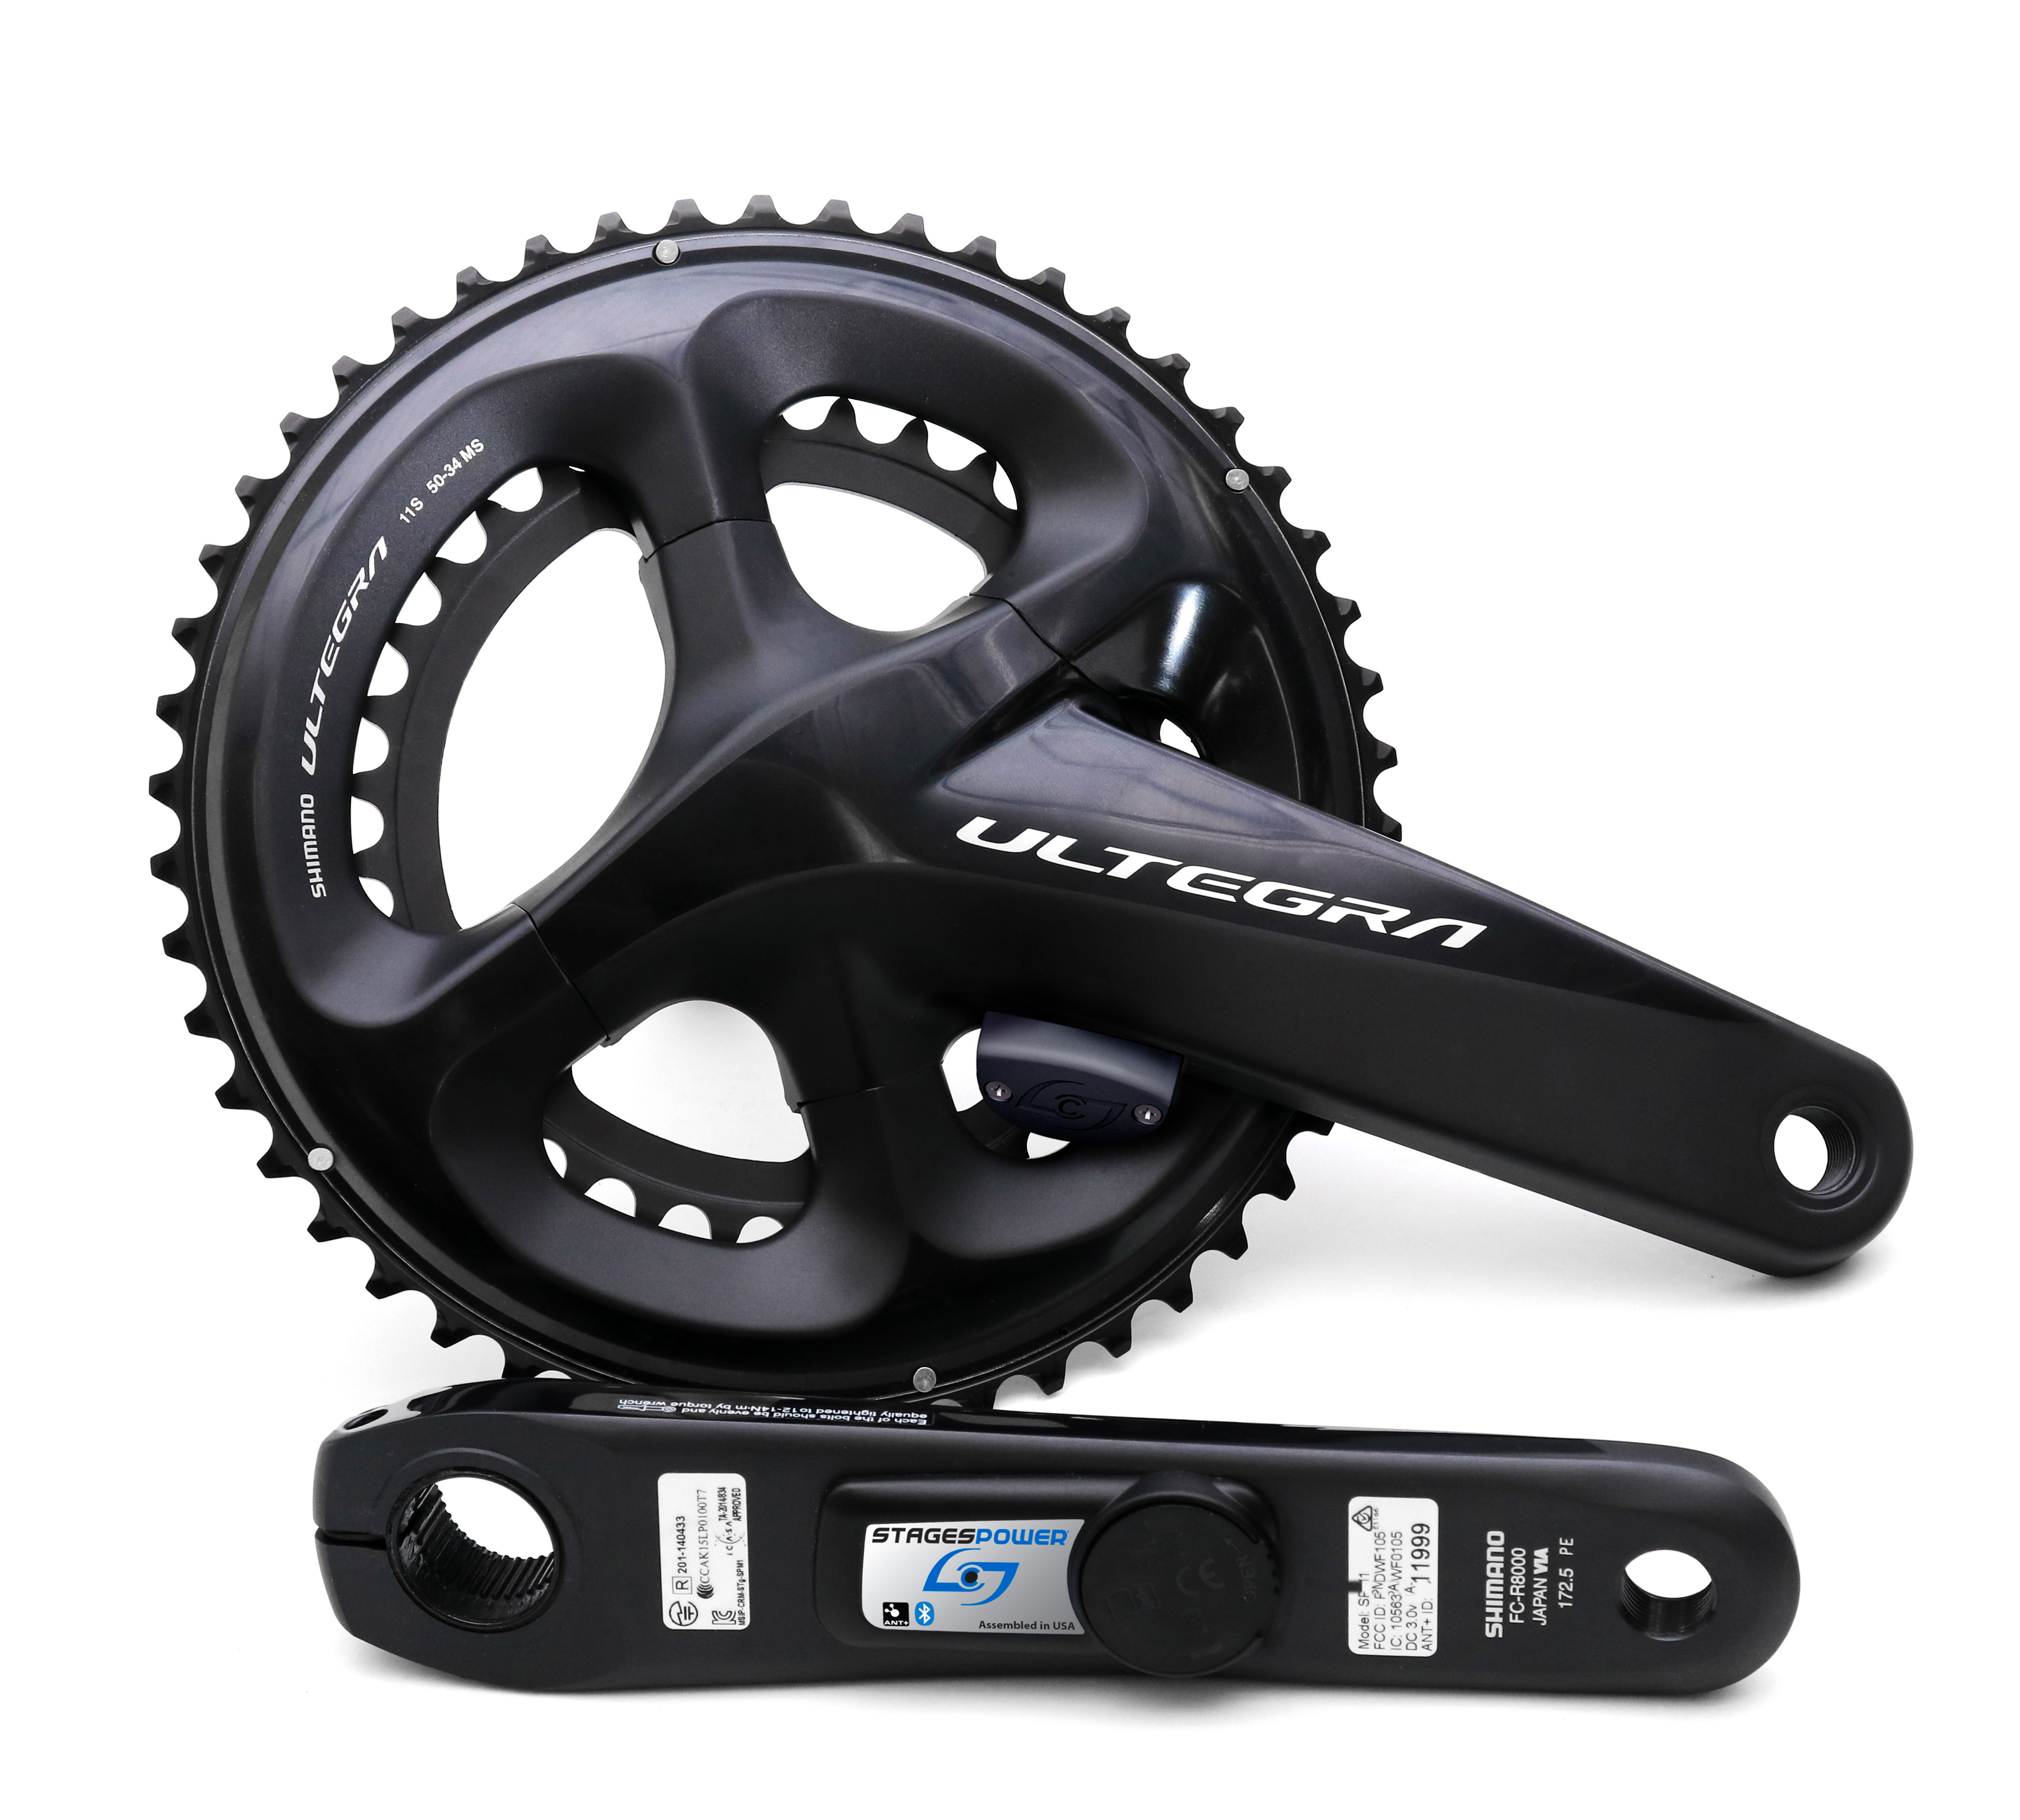 stages power meter r7000